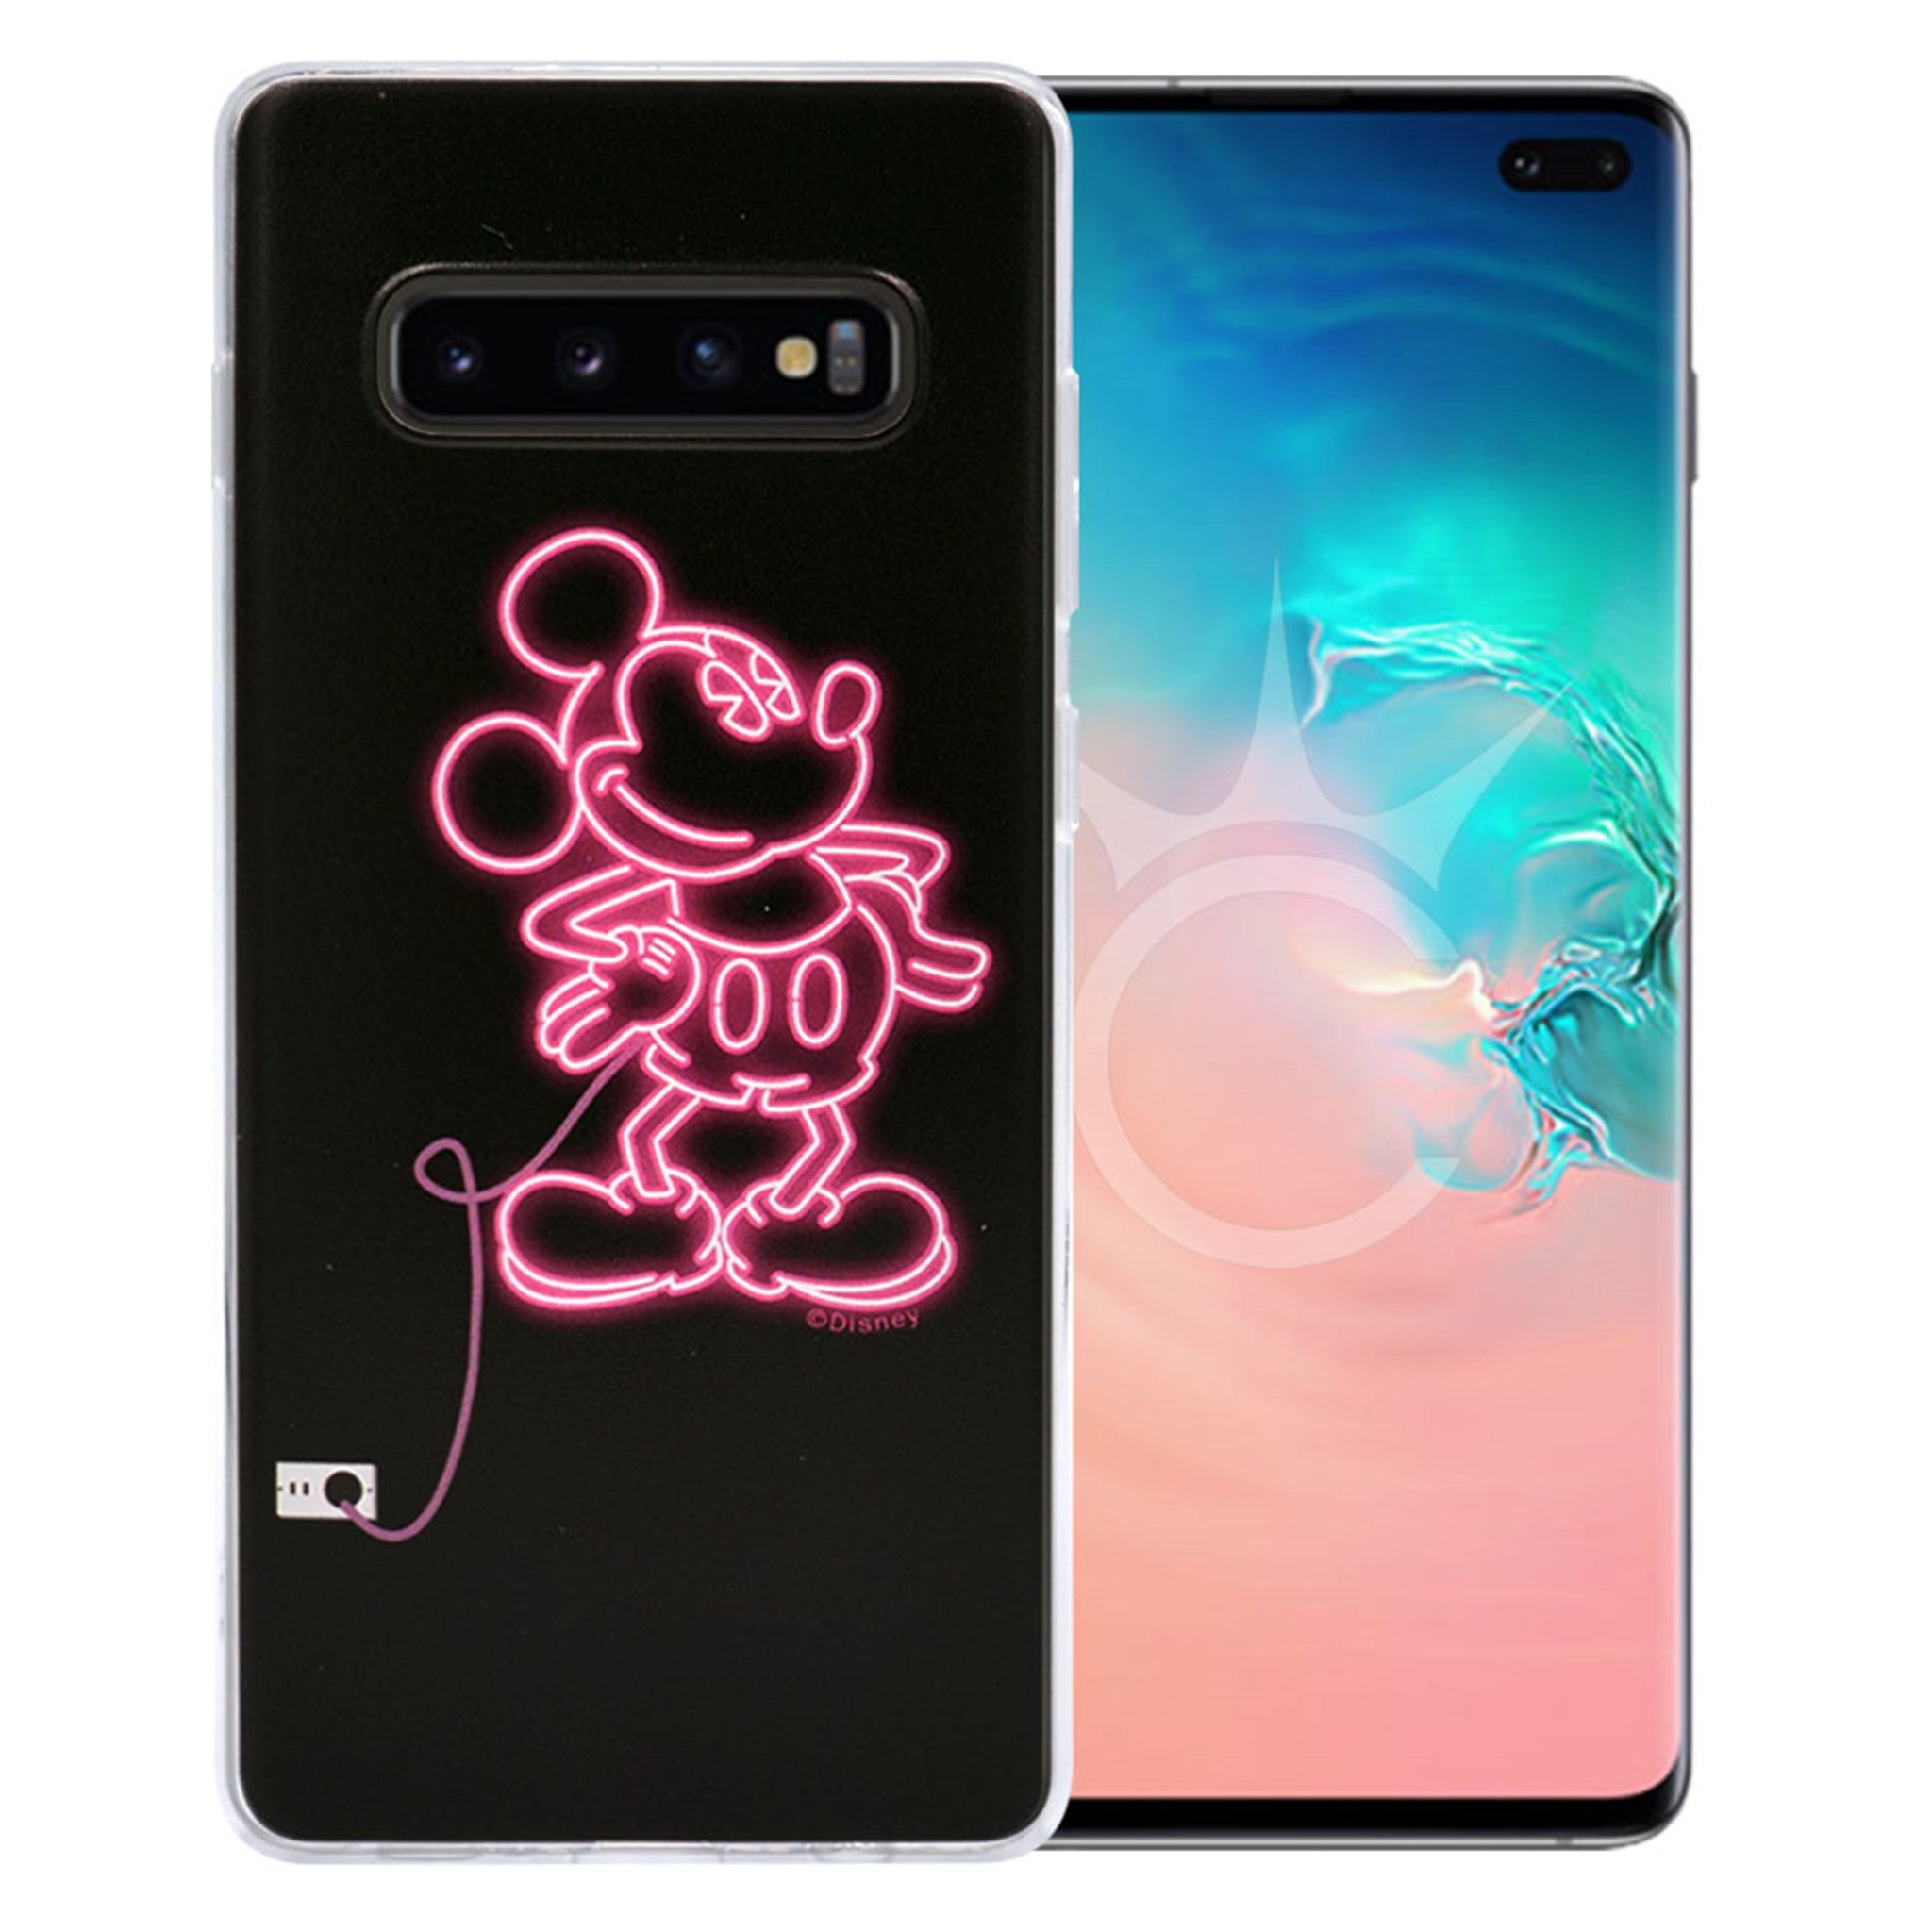 Mickey Mouse #1 Disney cover for Samsung Galaxy S10 Plus - Black